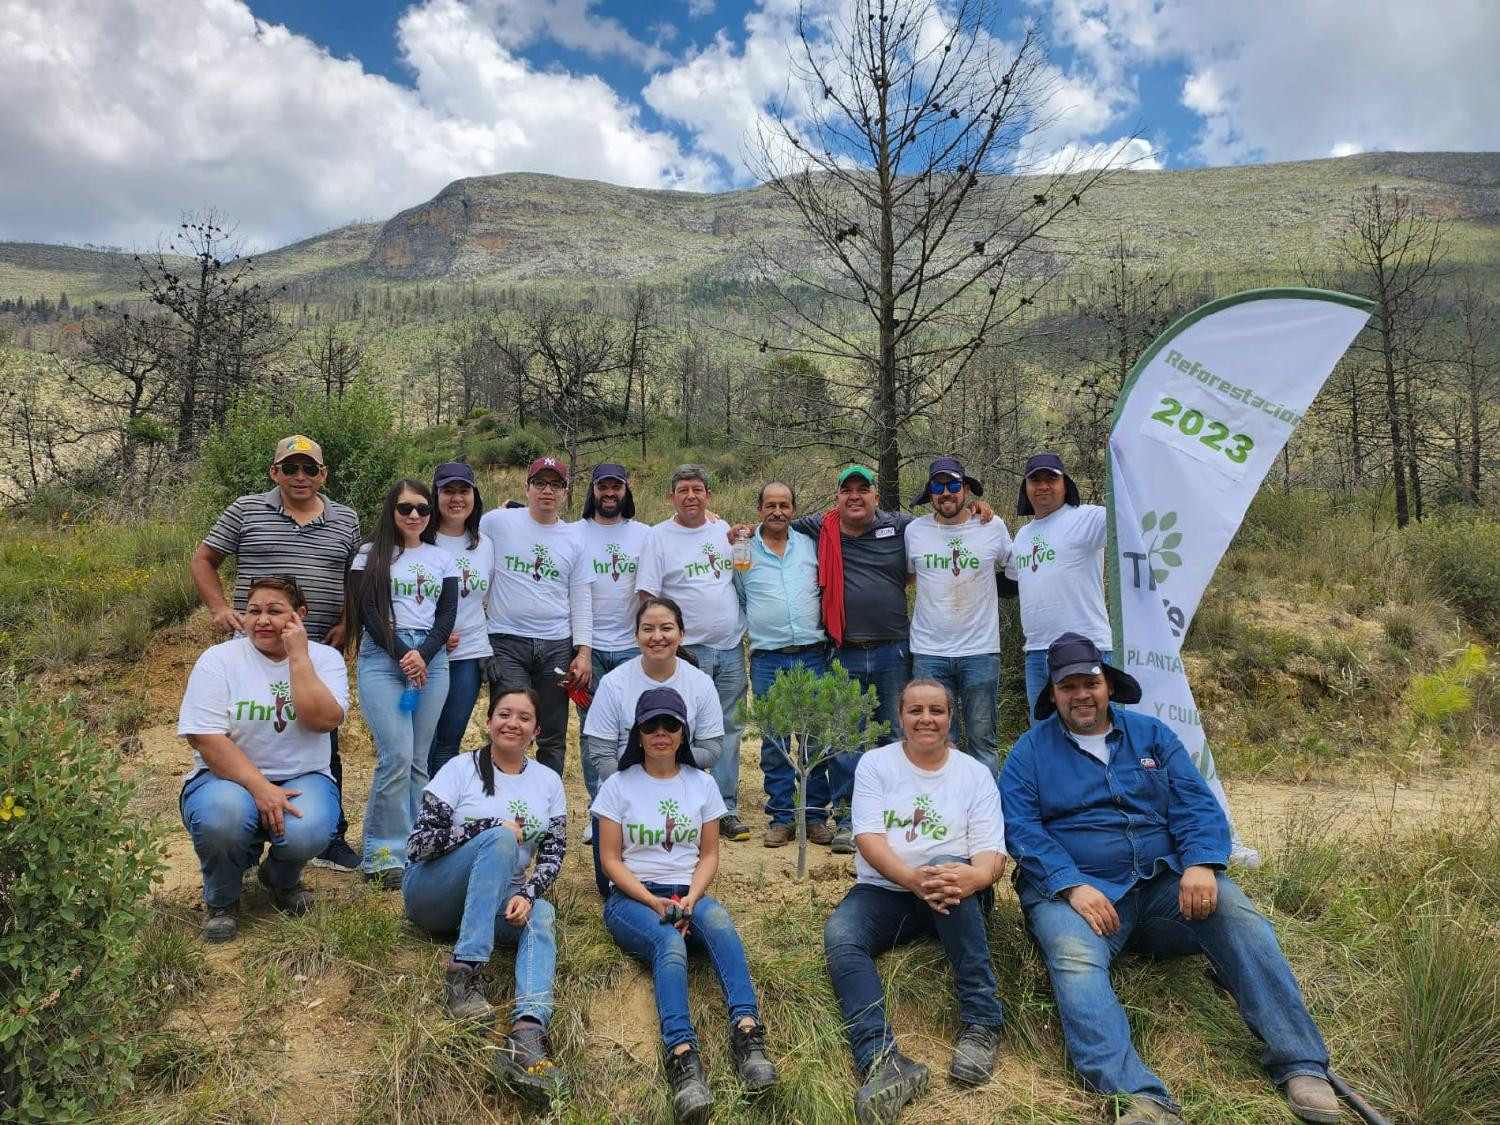 The Ramos team volunteering their time for reforestation efforts in the local community. 